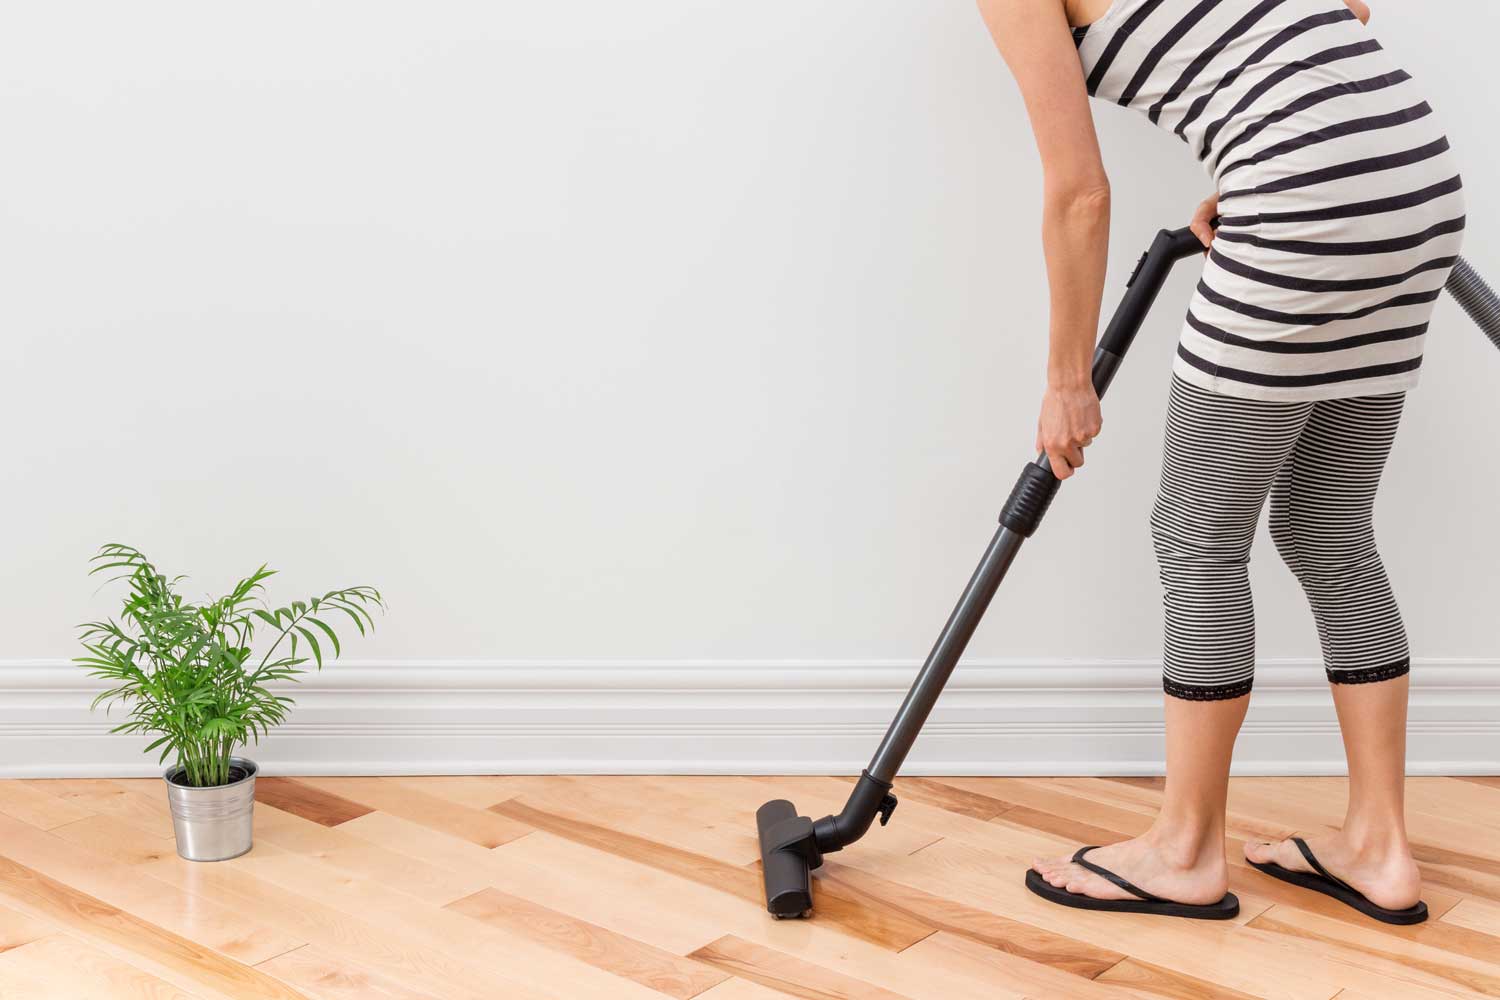 Regulary vacuum or sweep floors to remove dirt and keep your home floors looking amazing - tips from Footprints Floors in Charlotte.